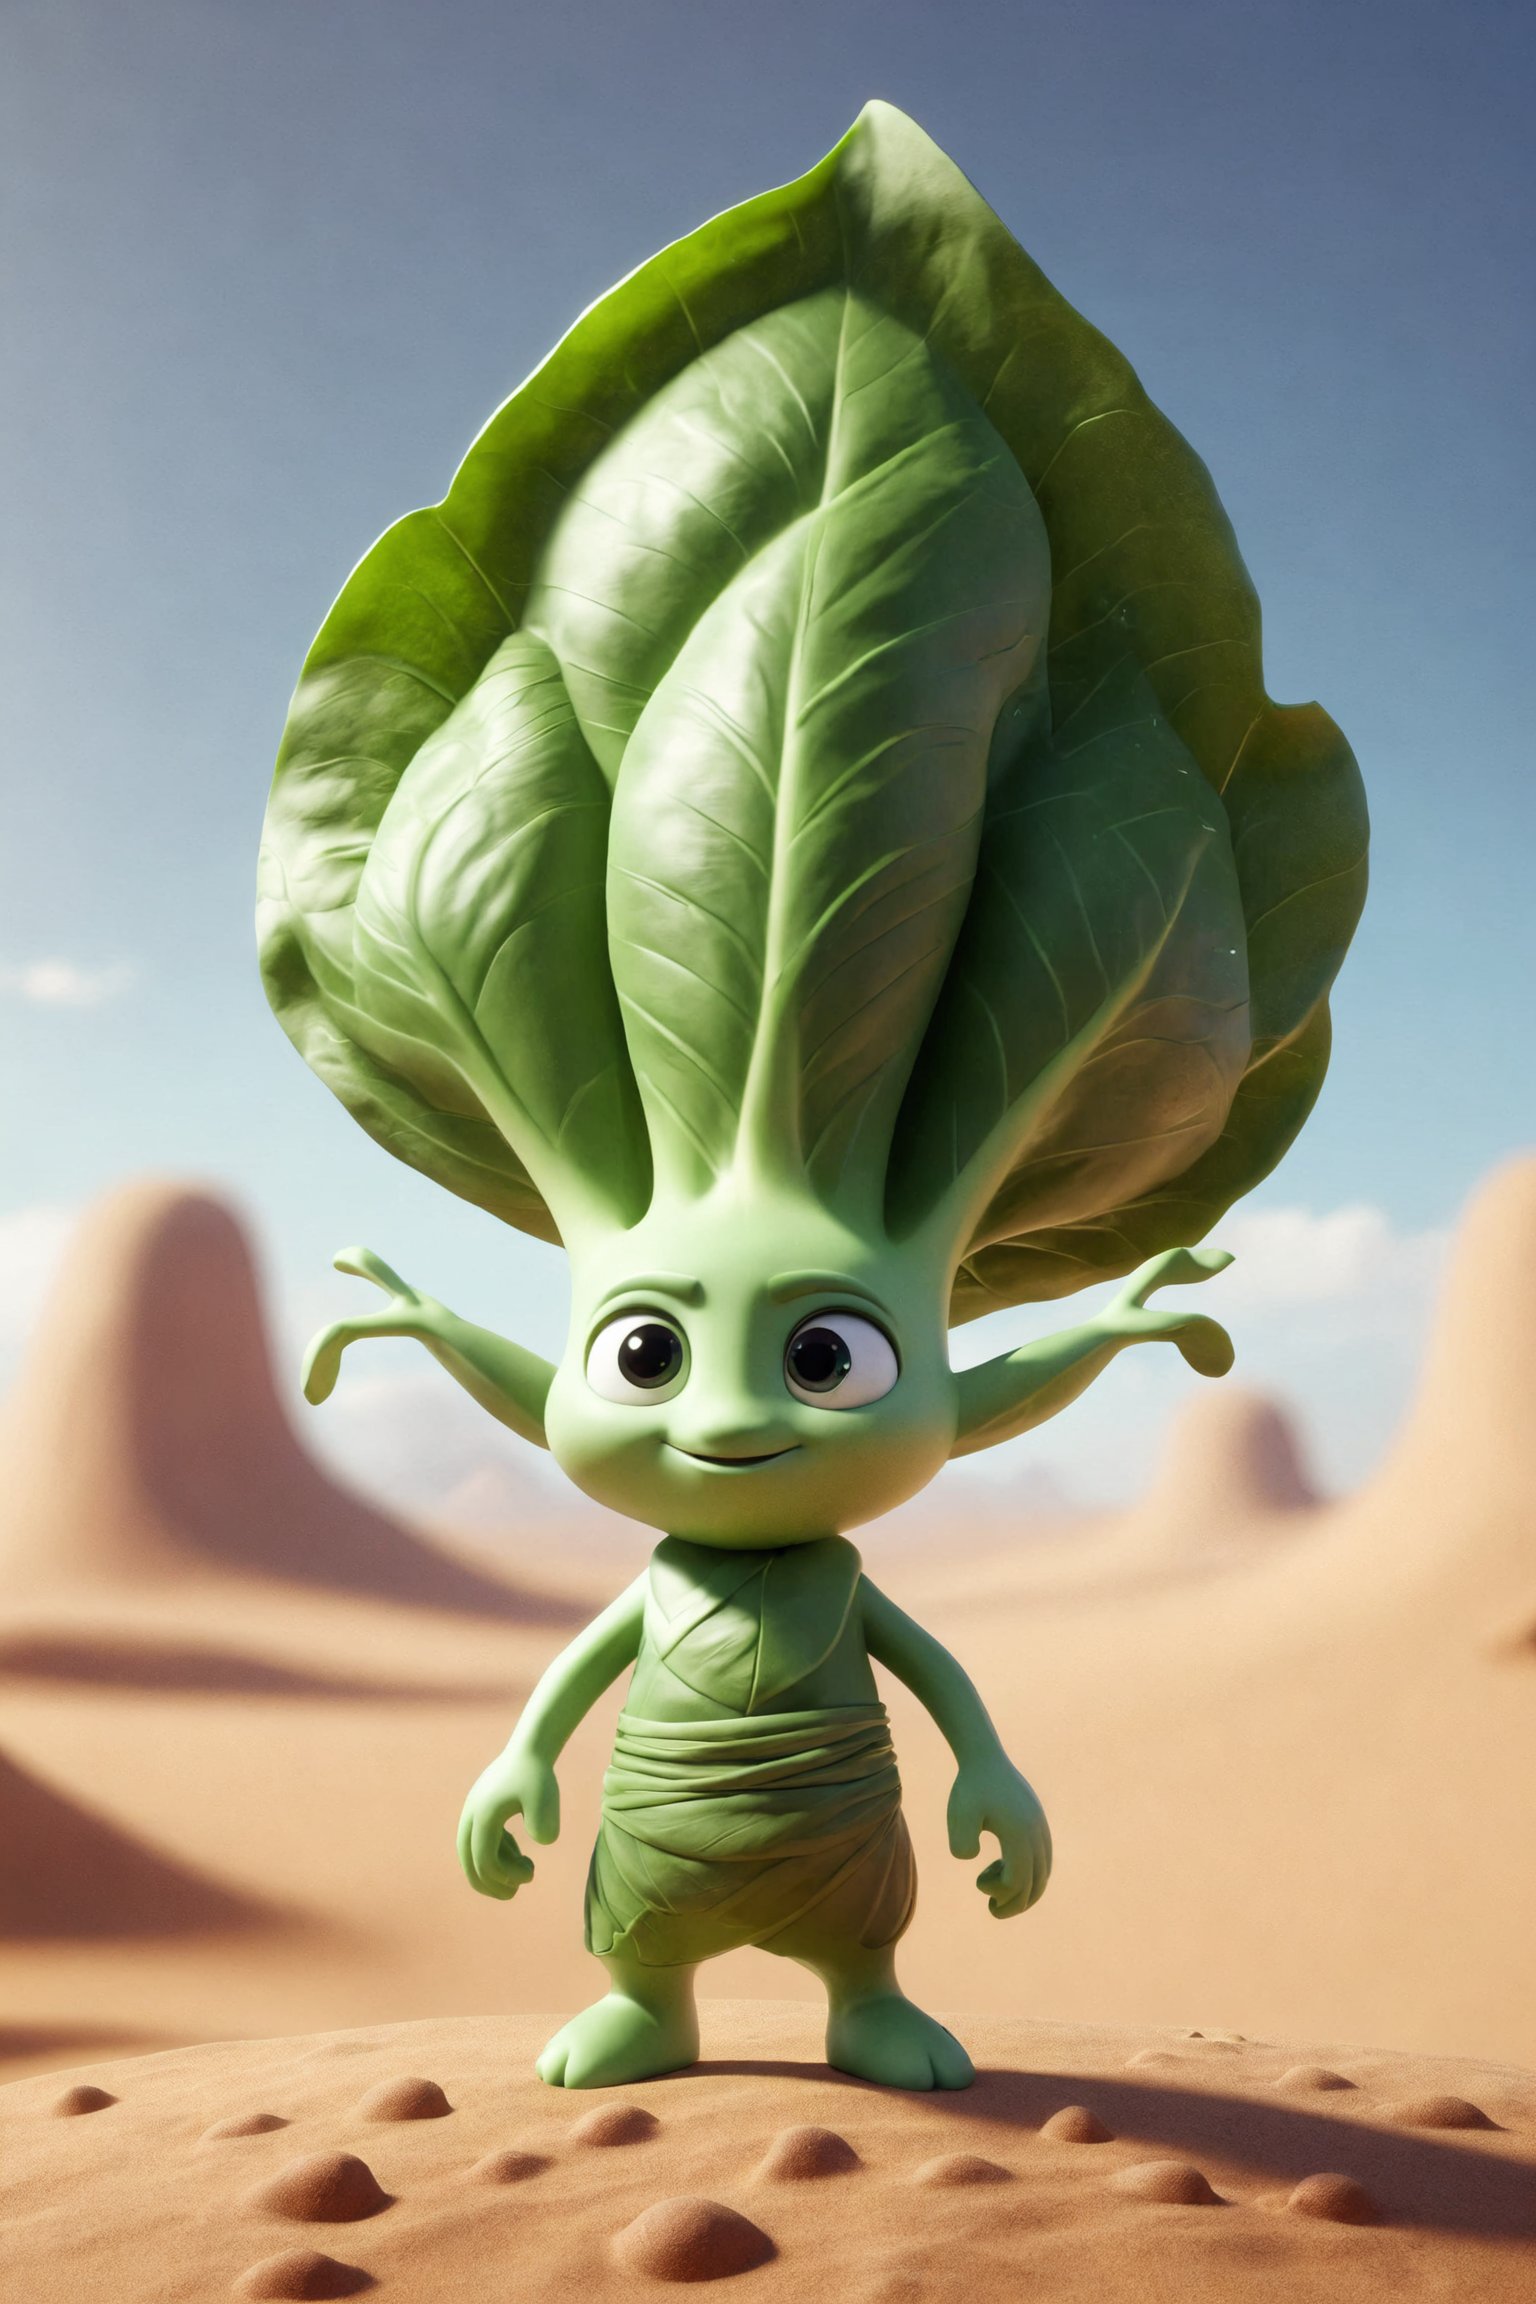 Epic characte cute style pixar of god of a spinach, full body mistic composition in a desert